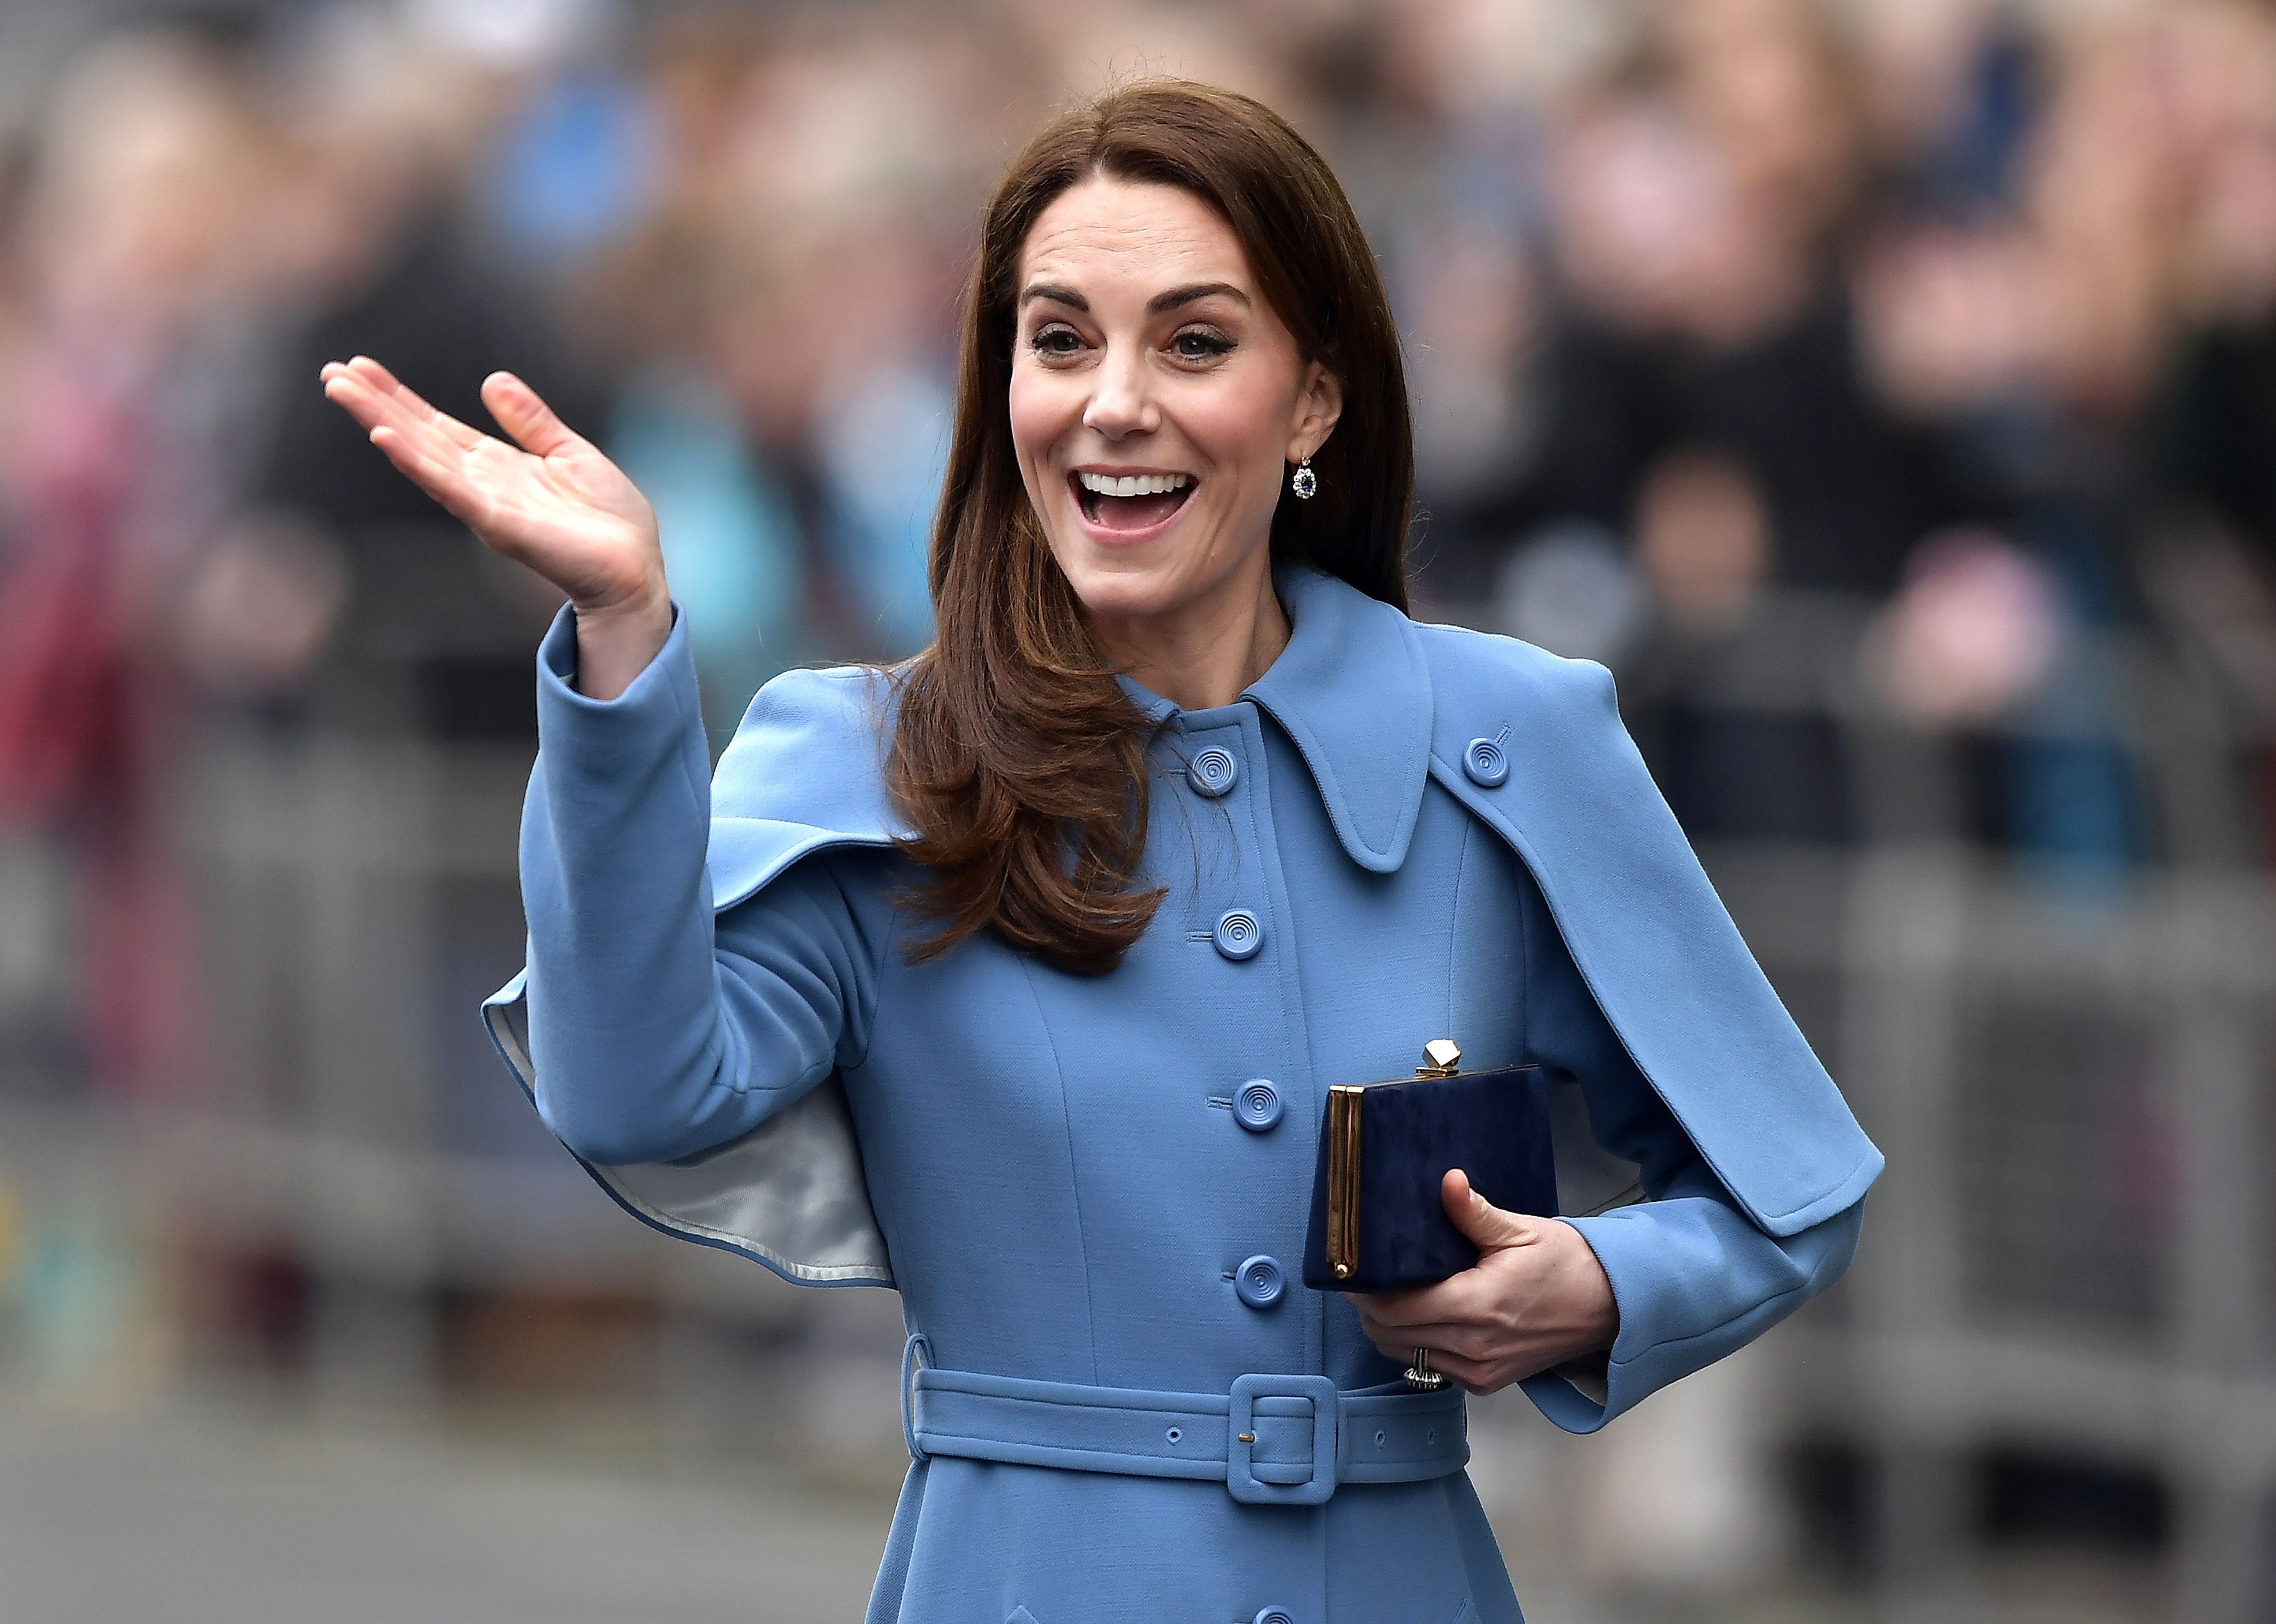 M&S just dropped the perfect £39 spring midi dress and I could totally see  Kate Middleton wearing it